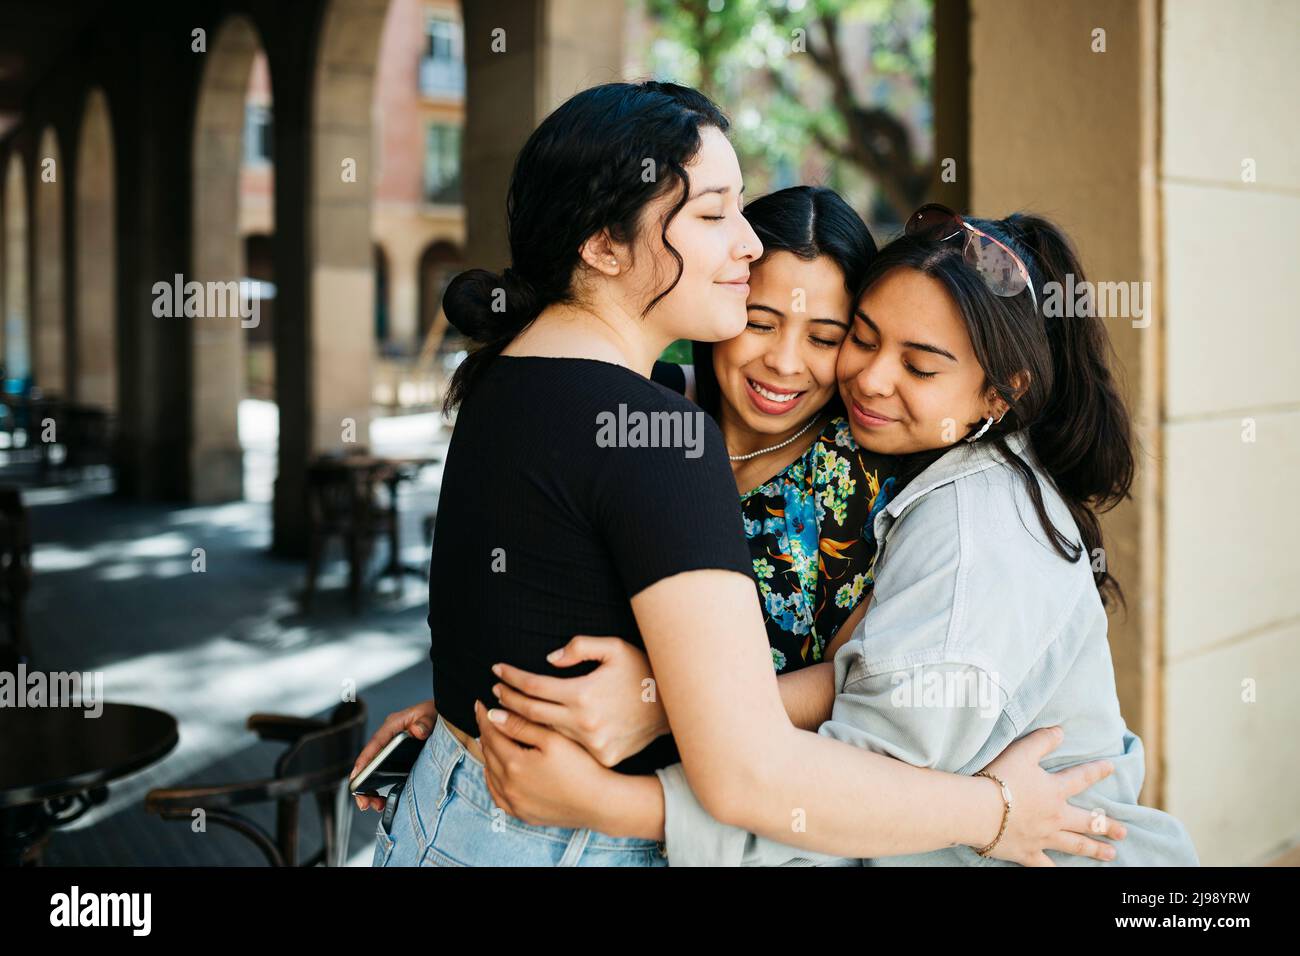 Three young latin american women embracing on the street Stock Photo